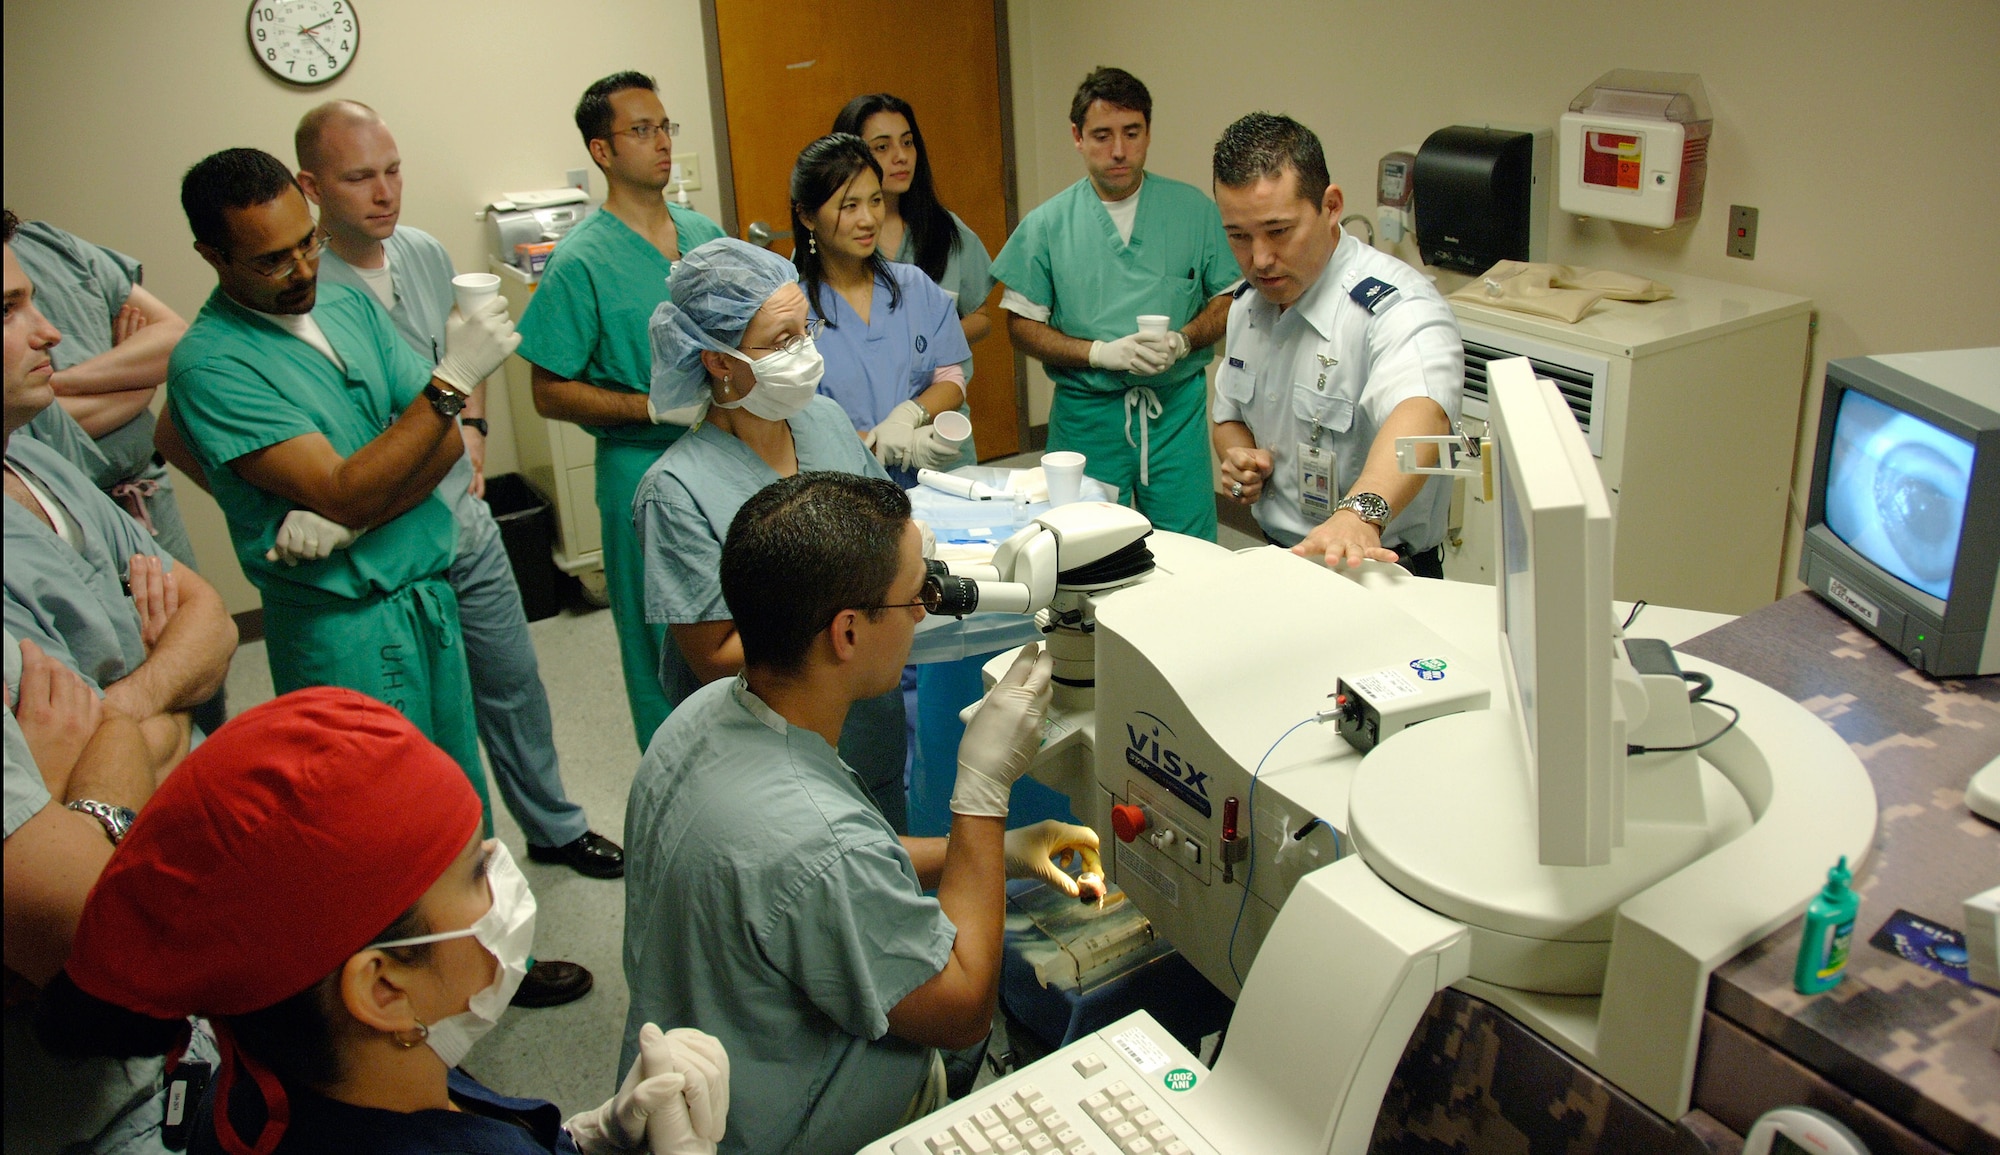 Lt. Col. (Dr.) Charles Reilly (right) instructs ophthalmology residents from Wilford Hall Medical Center, Brooke Army Medical Center and the University of Texas Health Science Center May 9 at the Joint Warfighter Refractive Surgery Center at WHMC at Lackland Air Force Base, Texas. Dr. Reilly is the consultant to the Air Force Surgeon General for Refractive Surgery and the Air Force?s only certified physician trainer for refractive surgery. (U.S. Air Force photo/Master Sgt. Kimberly A. Yearyean-Siers)